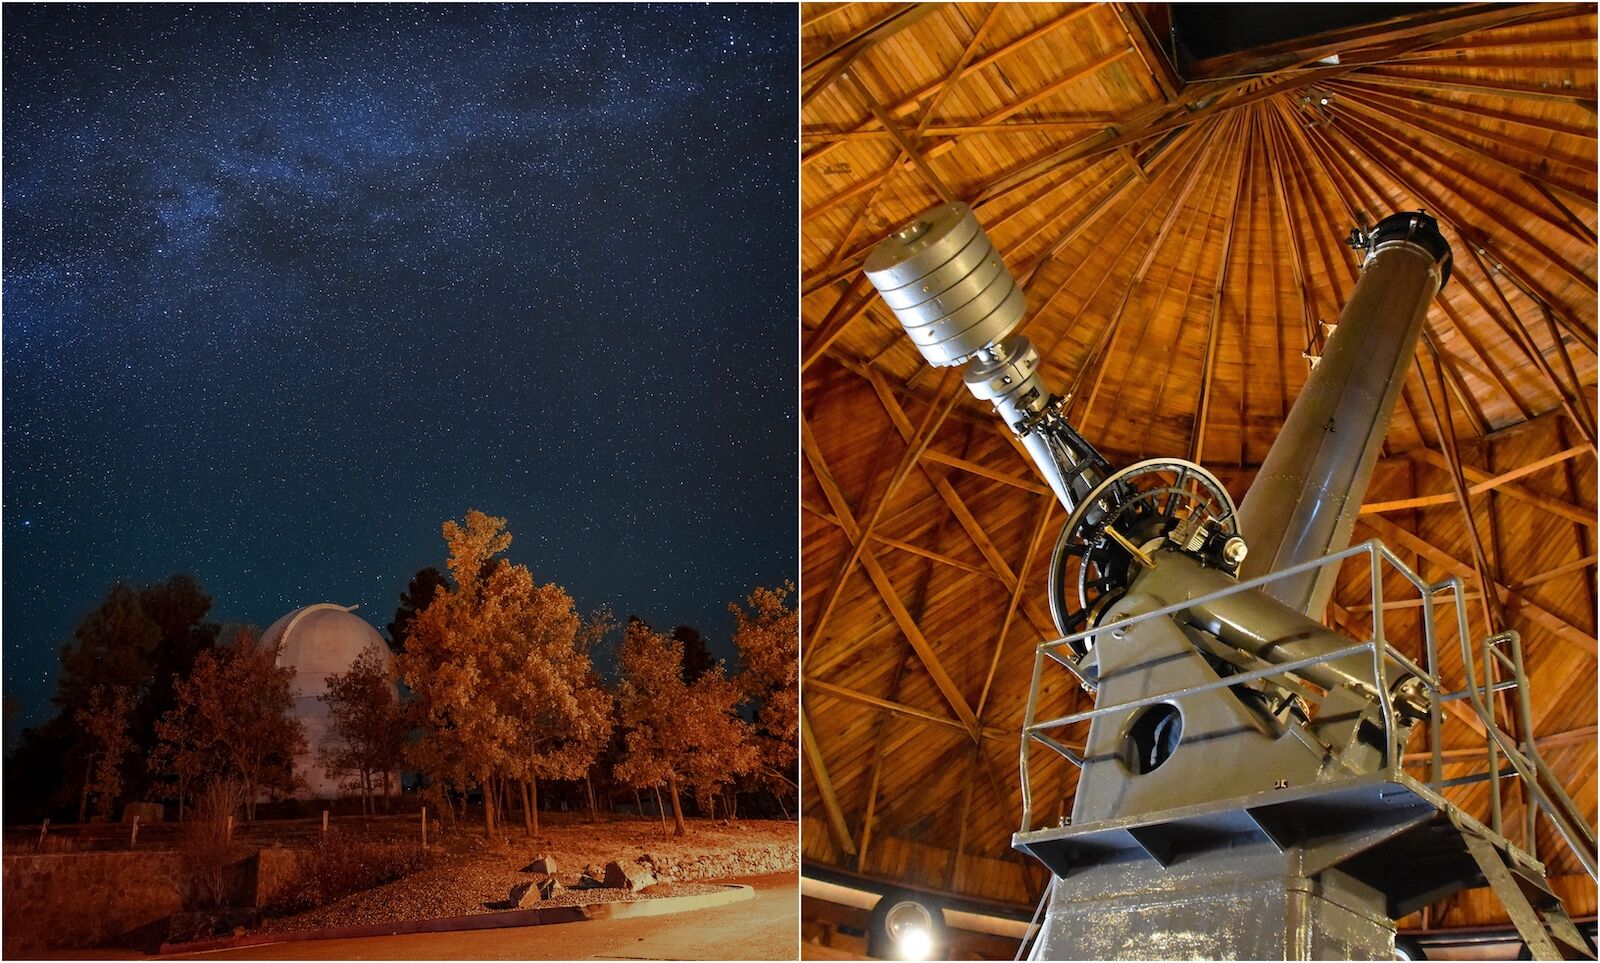 The Lowell Observatory in Flagstaff, Arizona, is one of the best US observatories